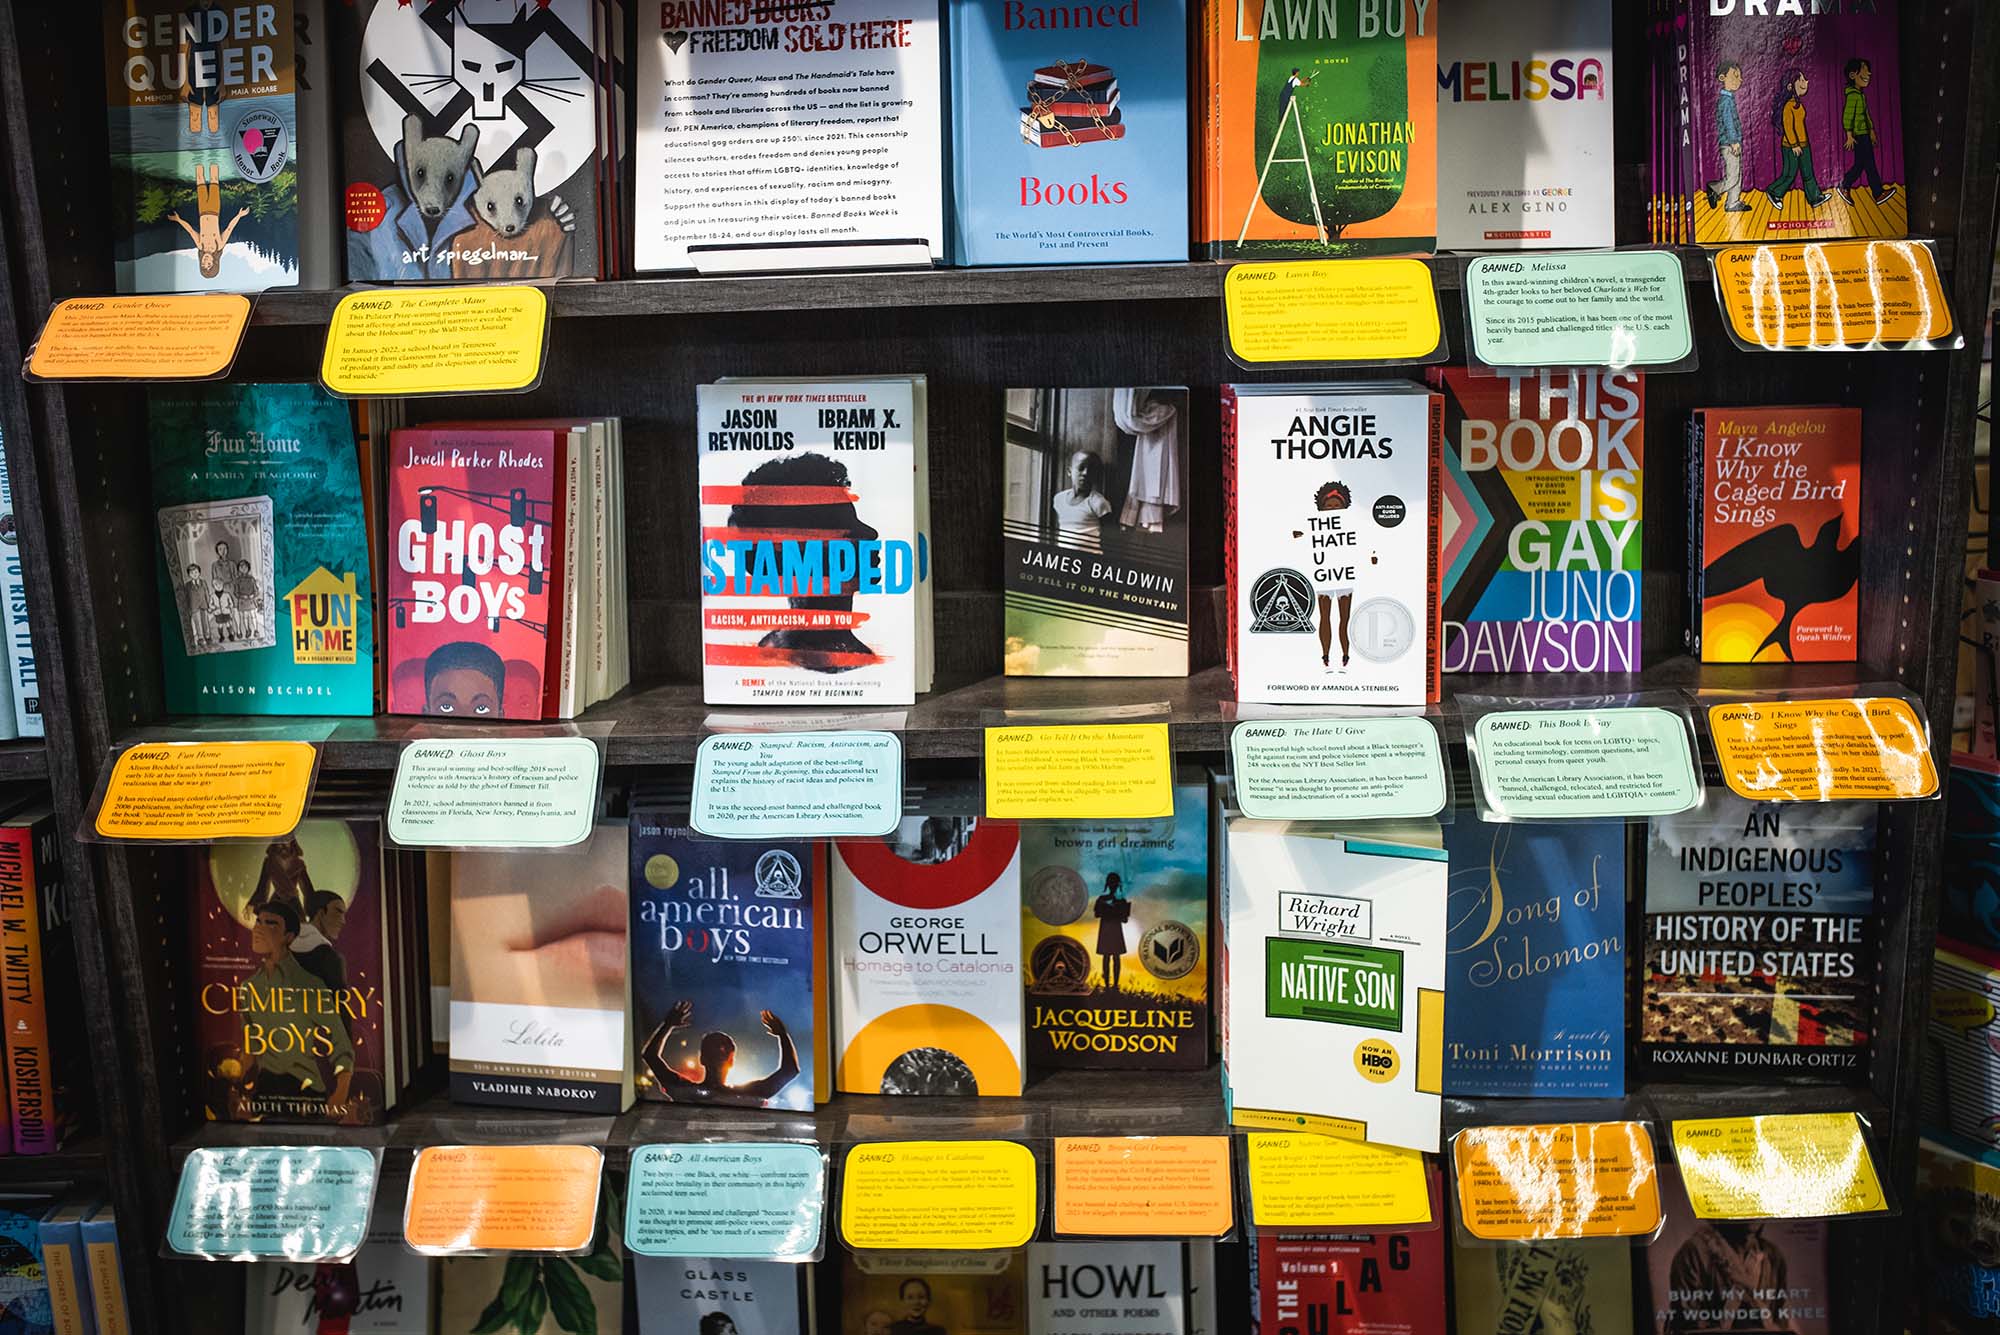 Want to Find a Banned Book? Brookline Booksmith Has Some on Display BU Today Boston University